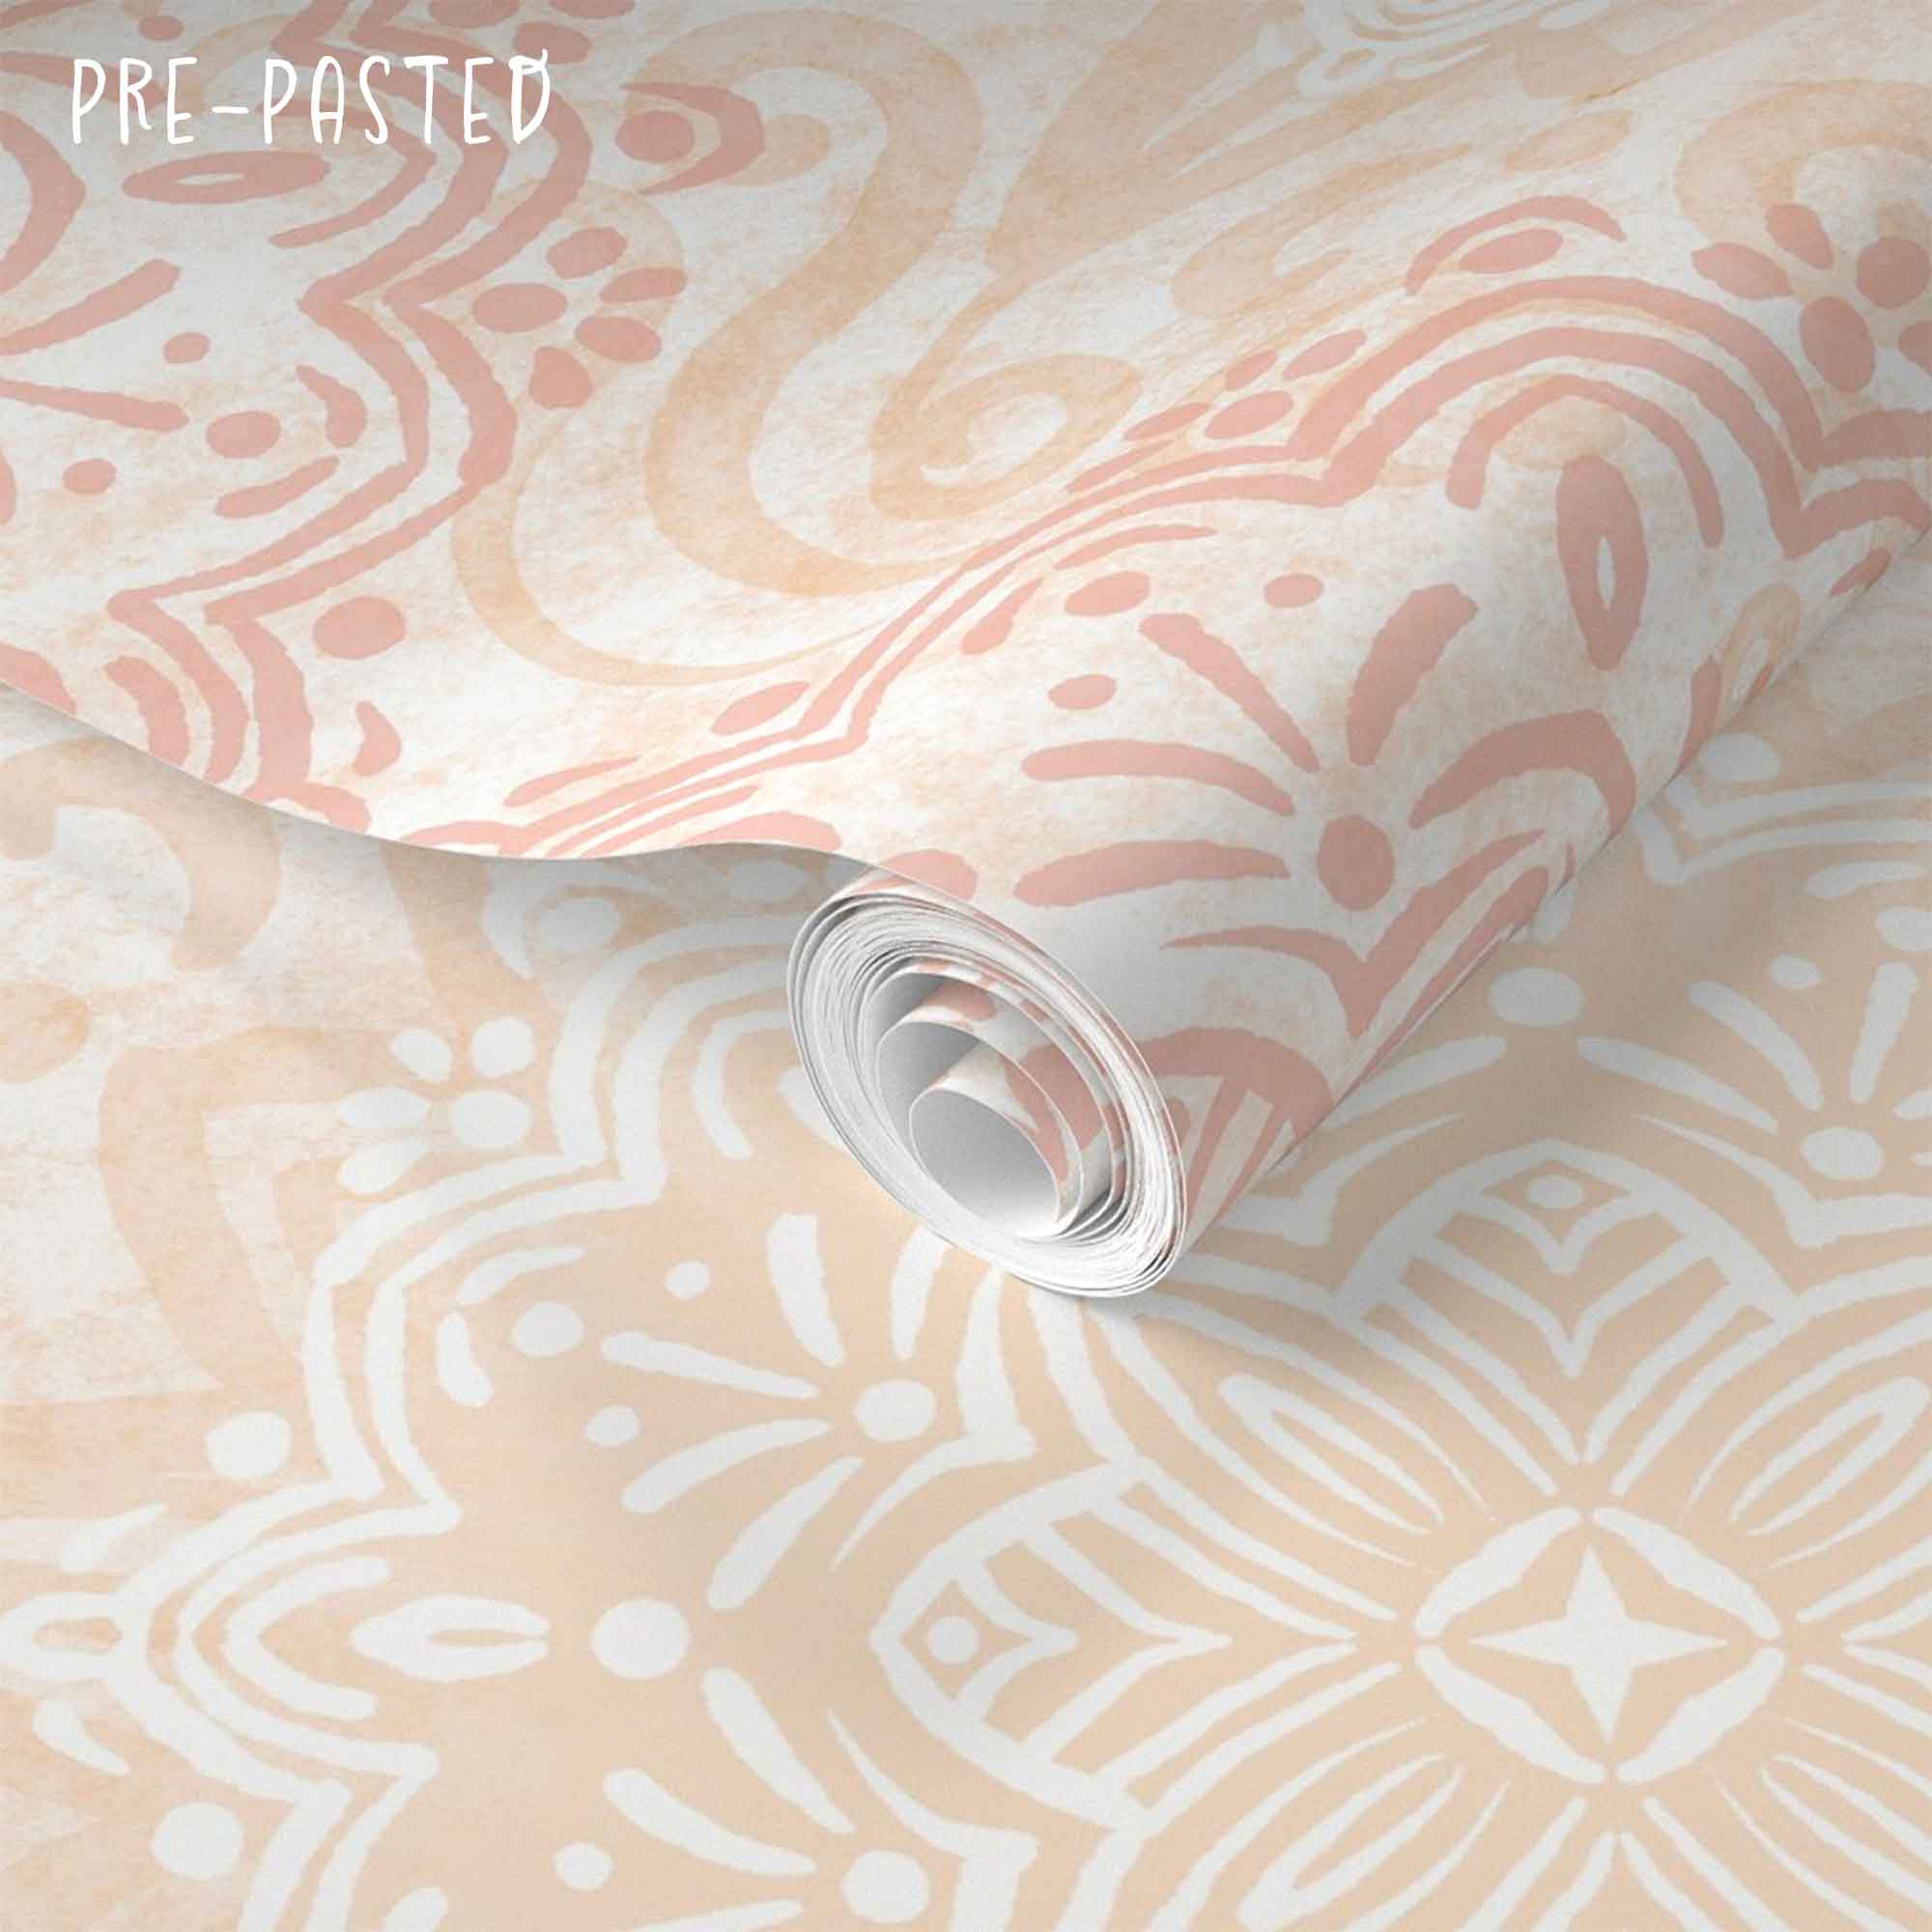 Boho Hand-drawn Mandalas in Pastel Rose, Peach and Lavender Removable Pre-Pasted Wallpaper Close up